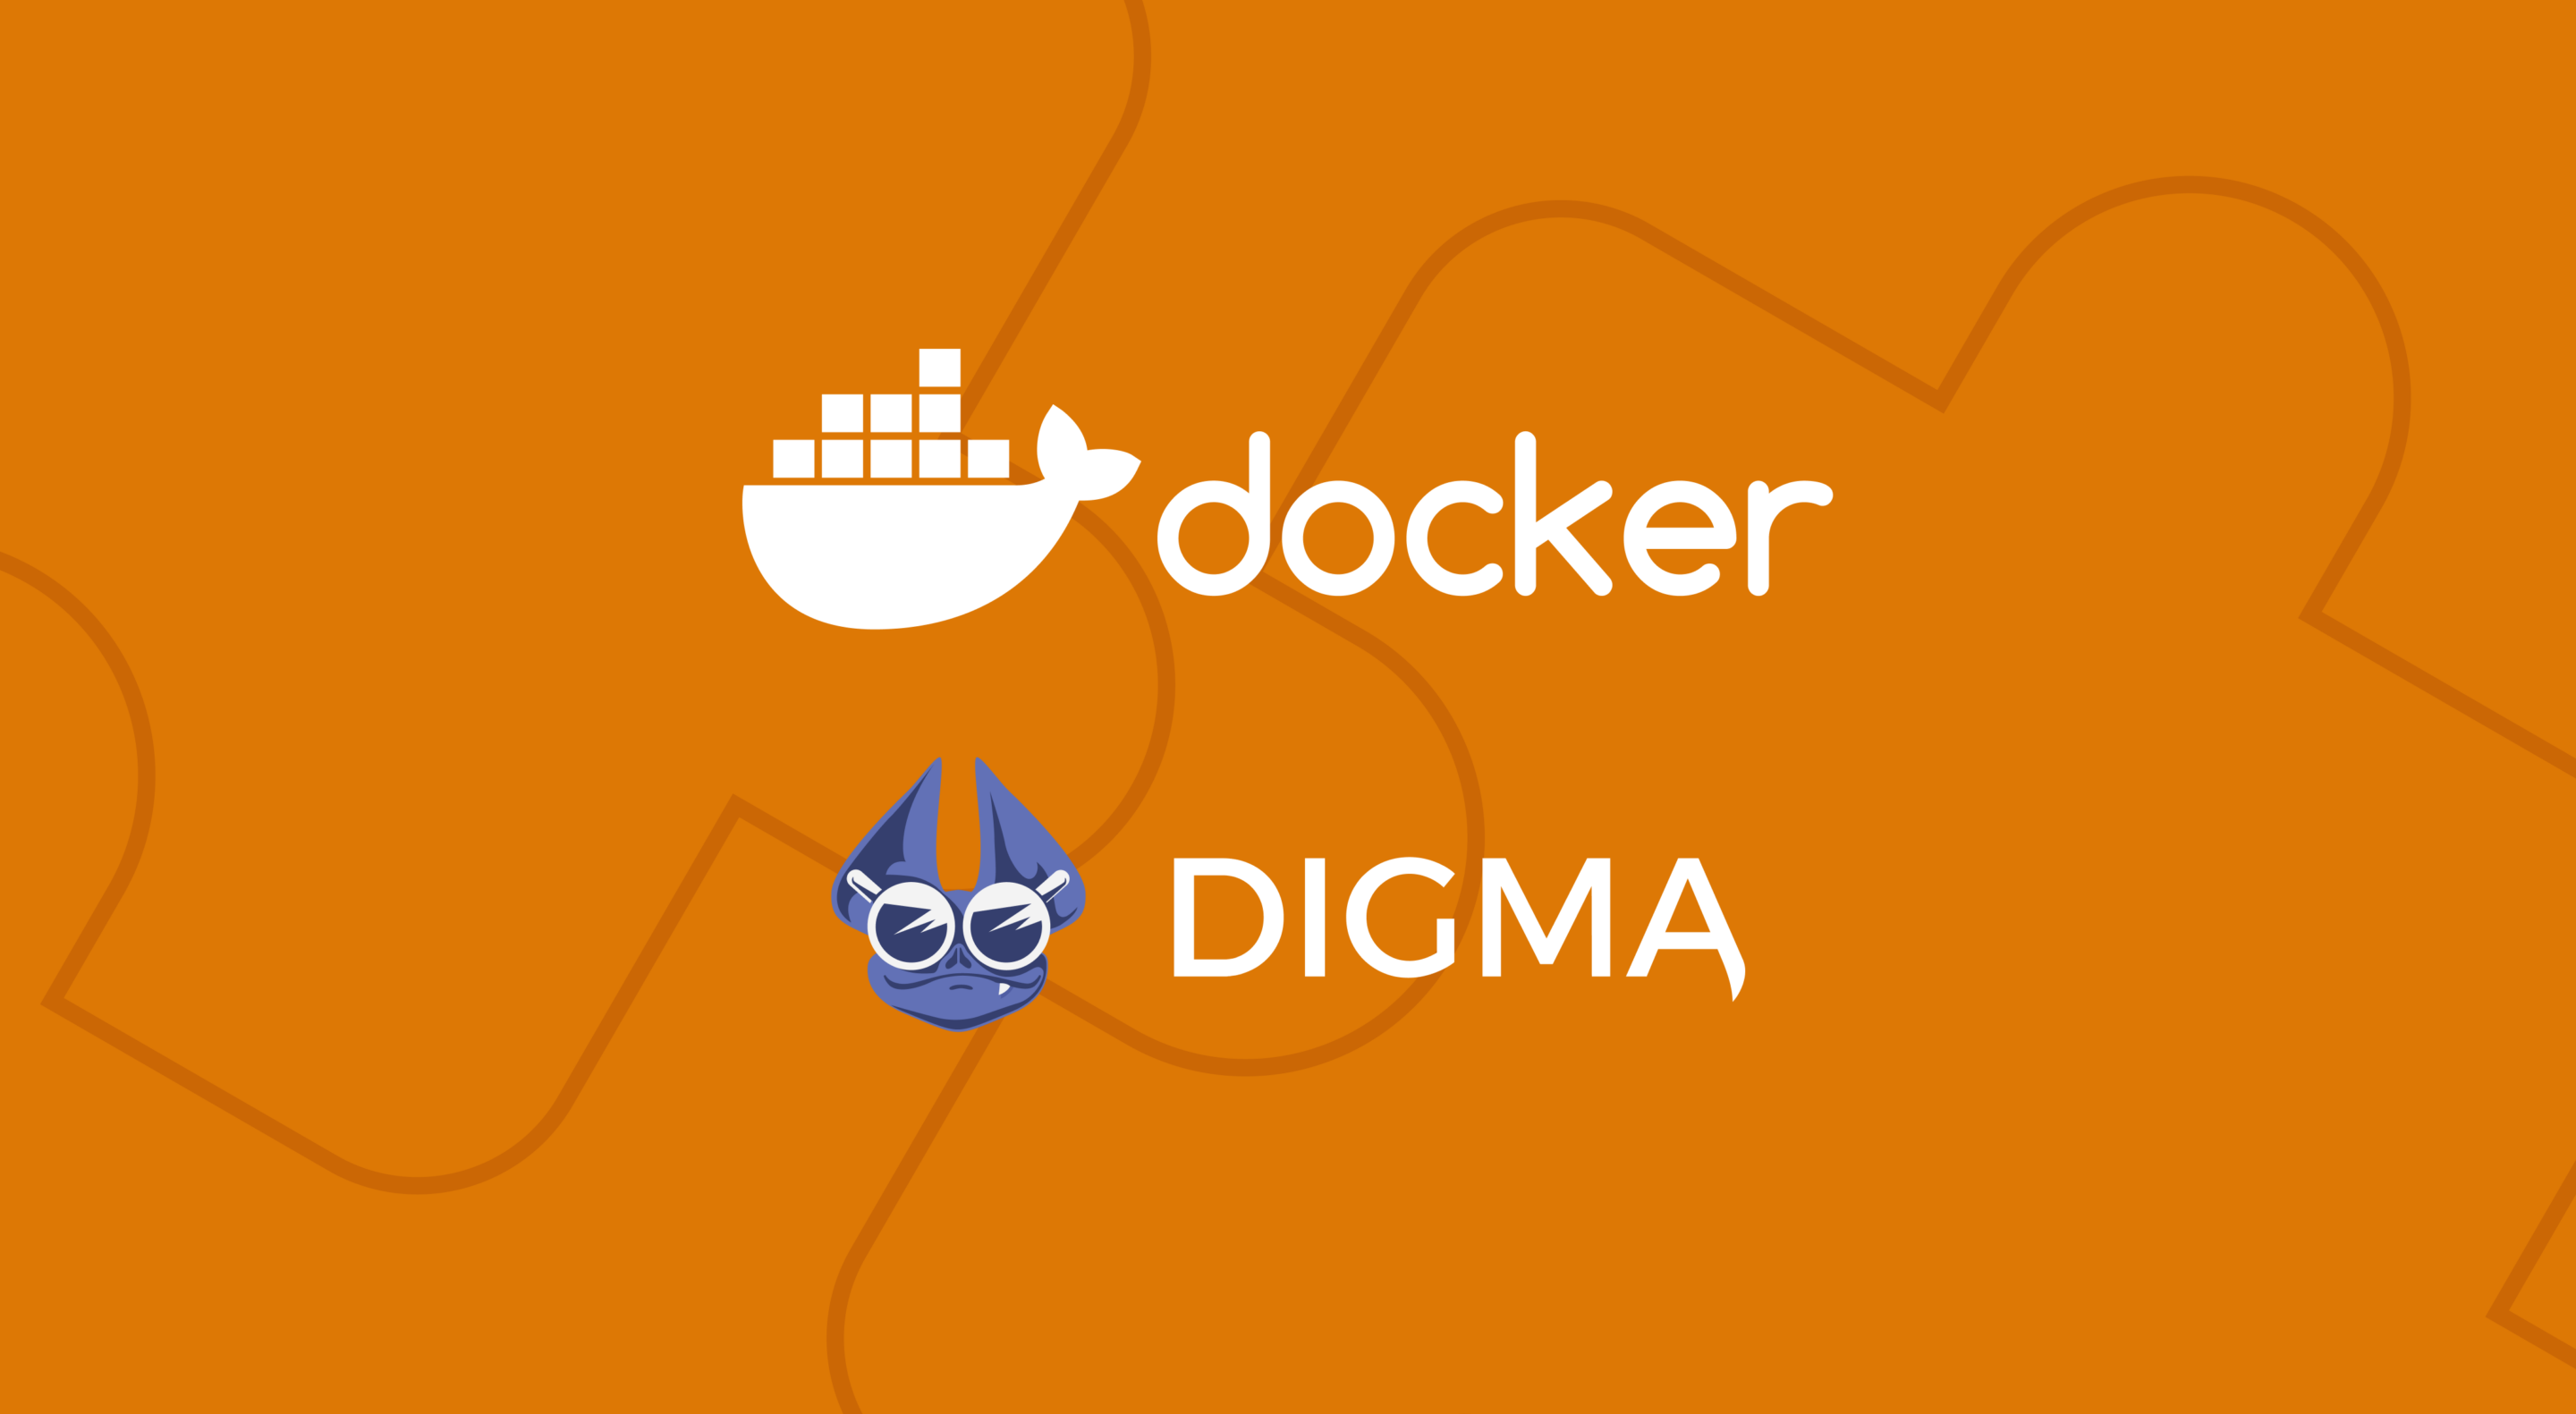 Shorter Feedback Loops Developing Java Apps with Digma’s Free Docker Extension